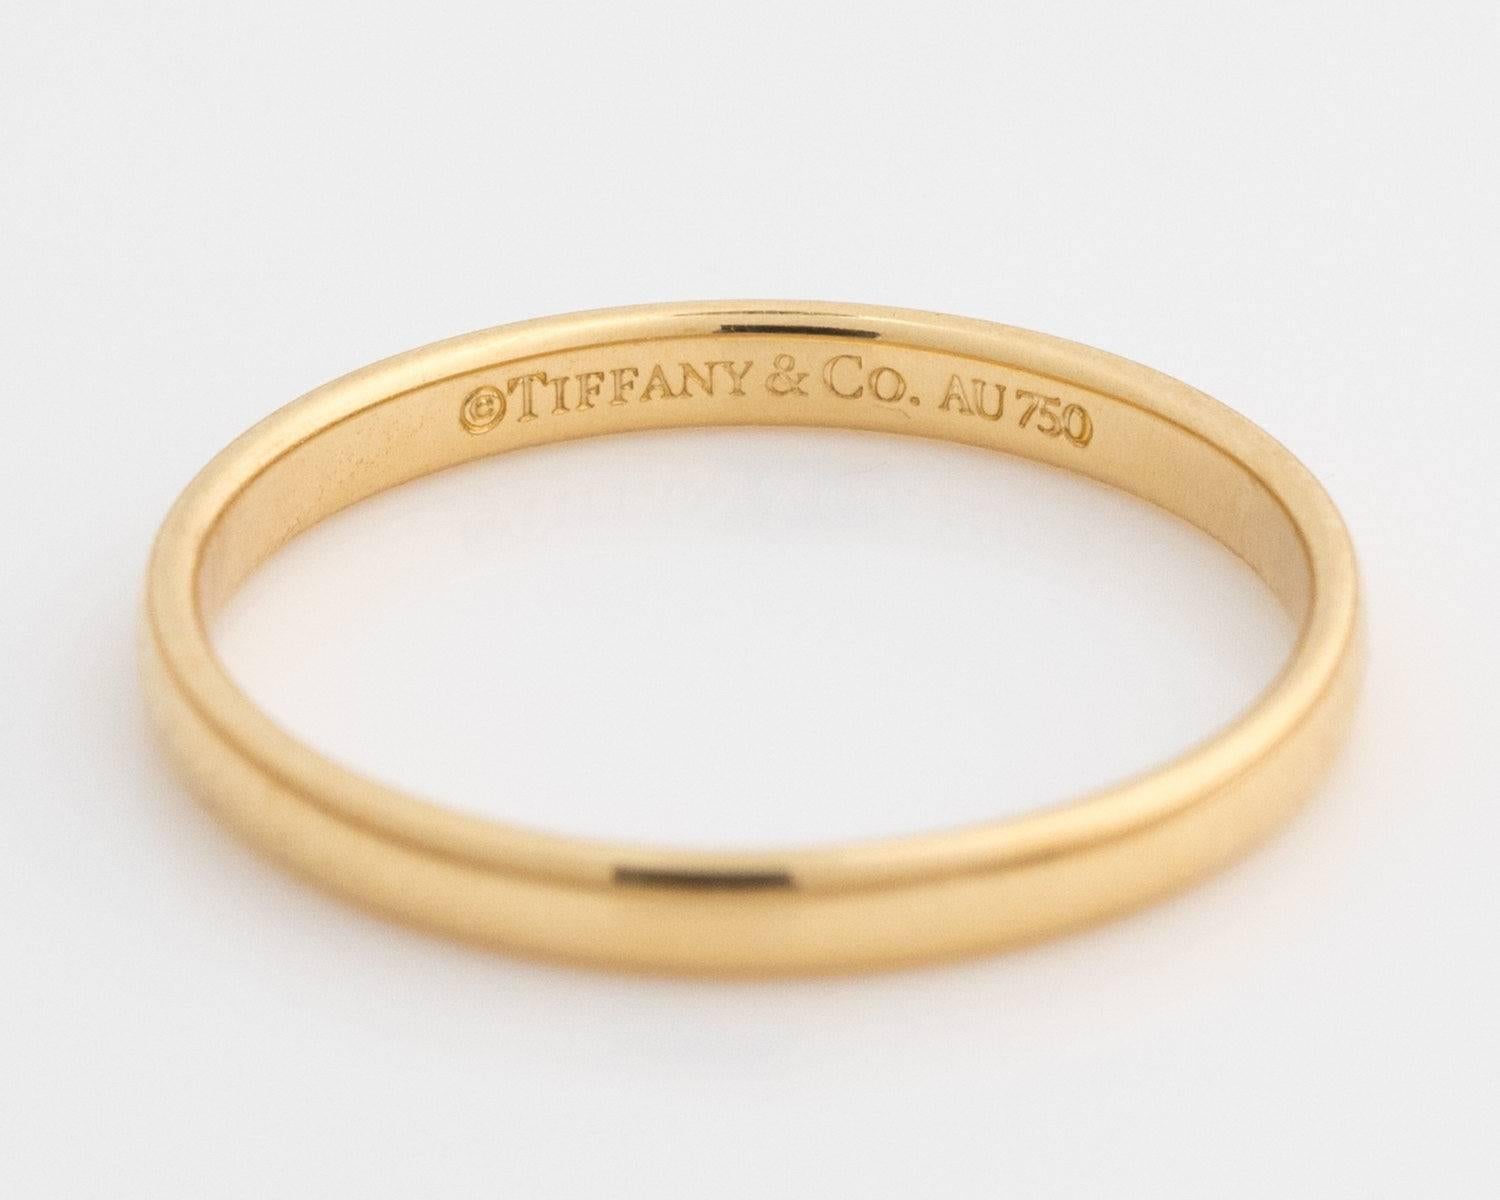 Tiffany and Co. Lucida 18 Karat Yellow Gold Wedding Band

This Tiffany and Co. Classic Ring is crafted from 18 Karat Yellow Gold. It has a high polish inside and out. 
The ring is 2 mm in height with a band thickness of 1 mm. There is room for an